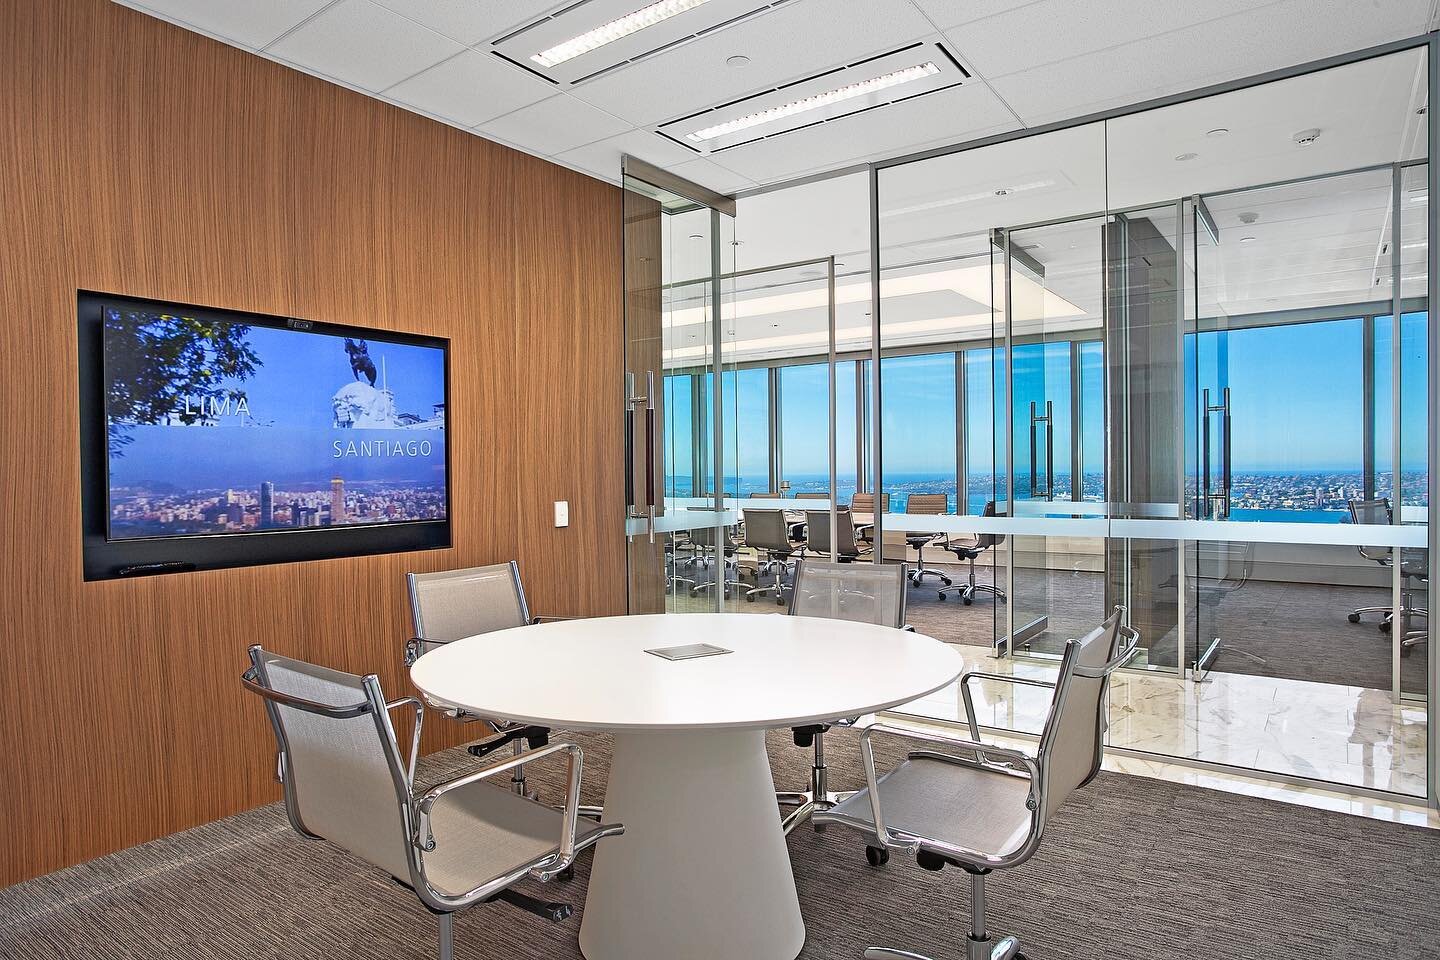 Simplicity, natural light, and panoramic views across Sydney - the perfect meeting room at Scotiabank 💫

#vantagespace